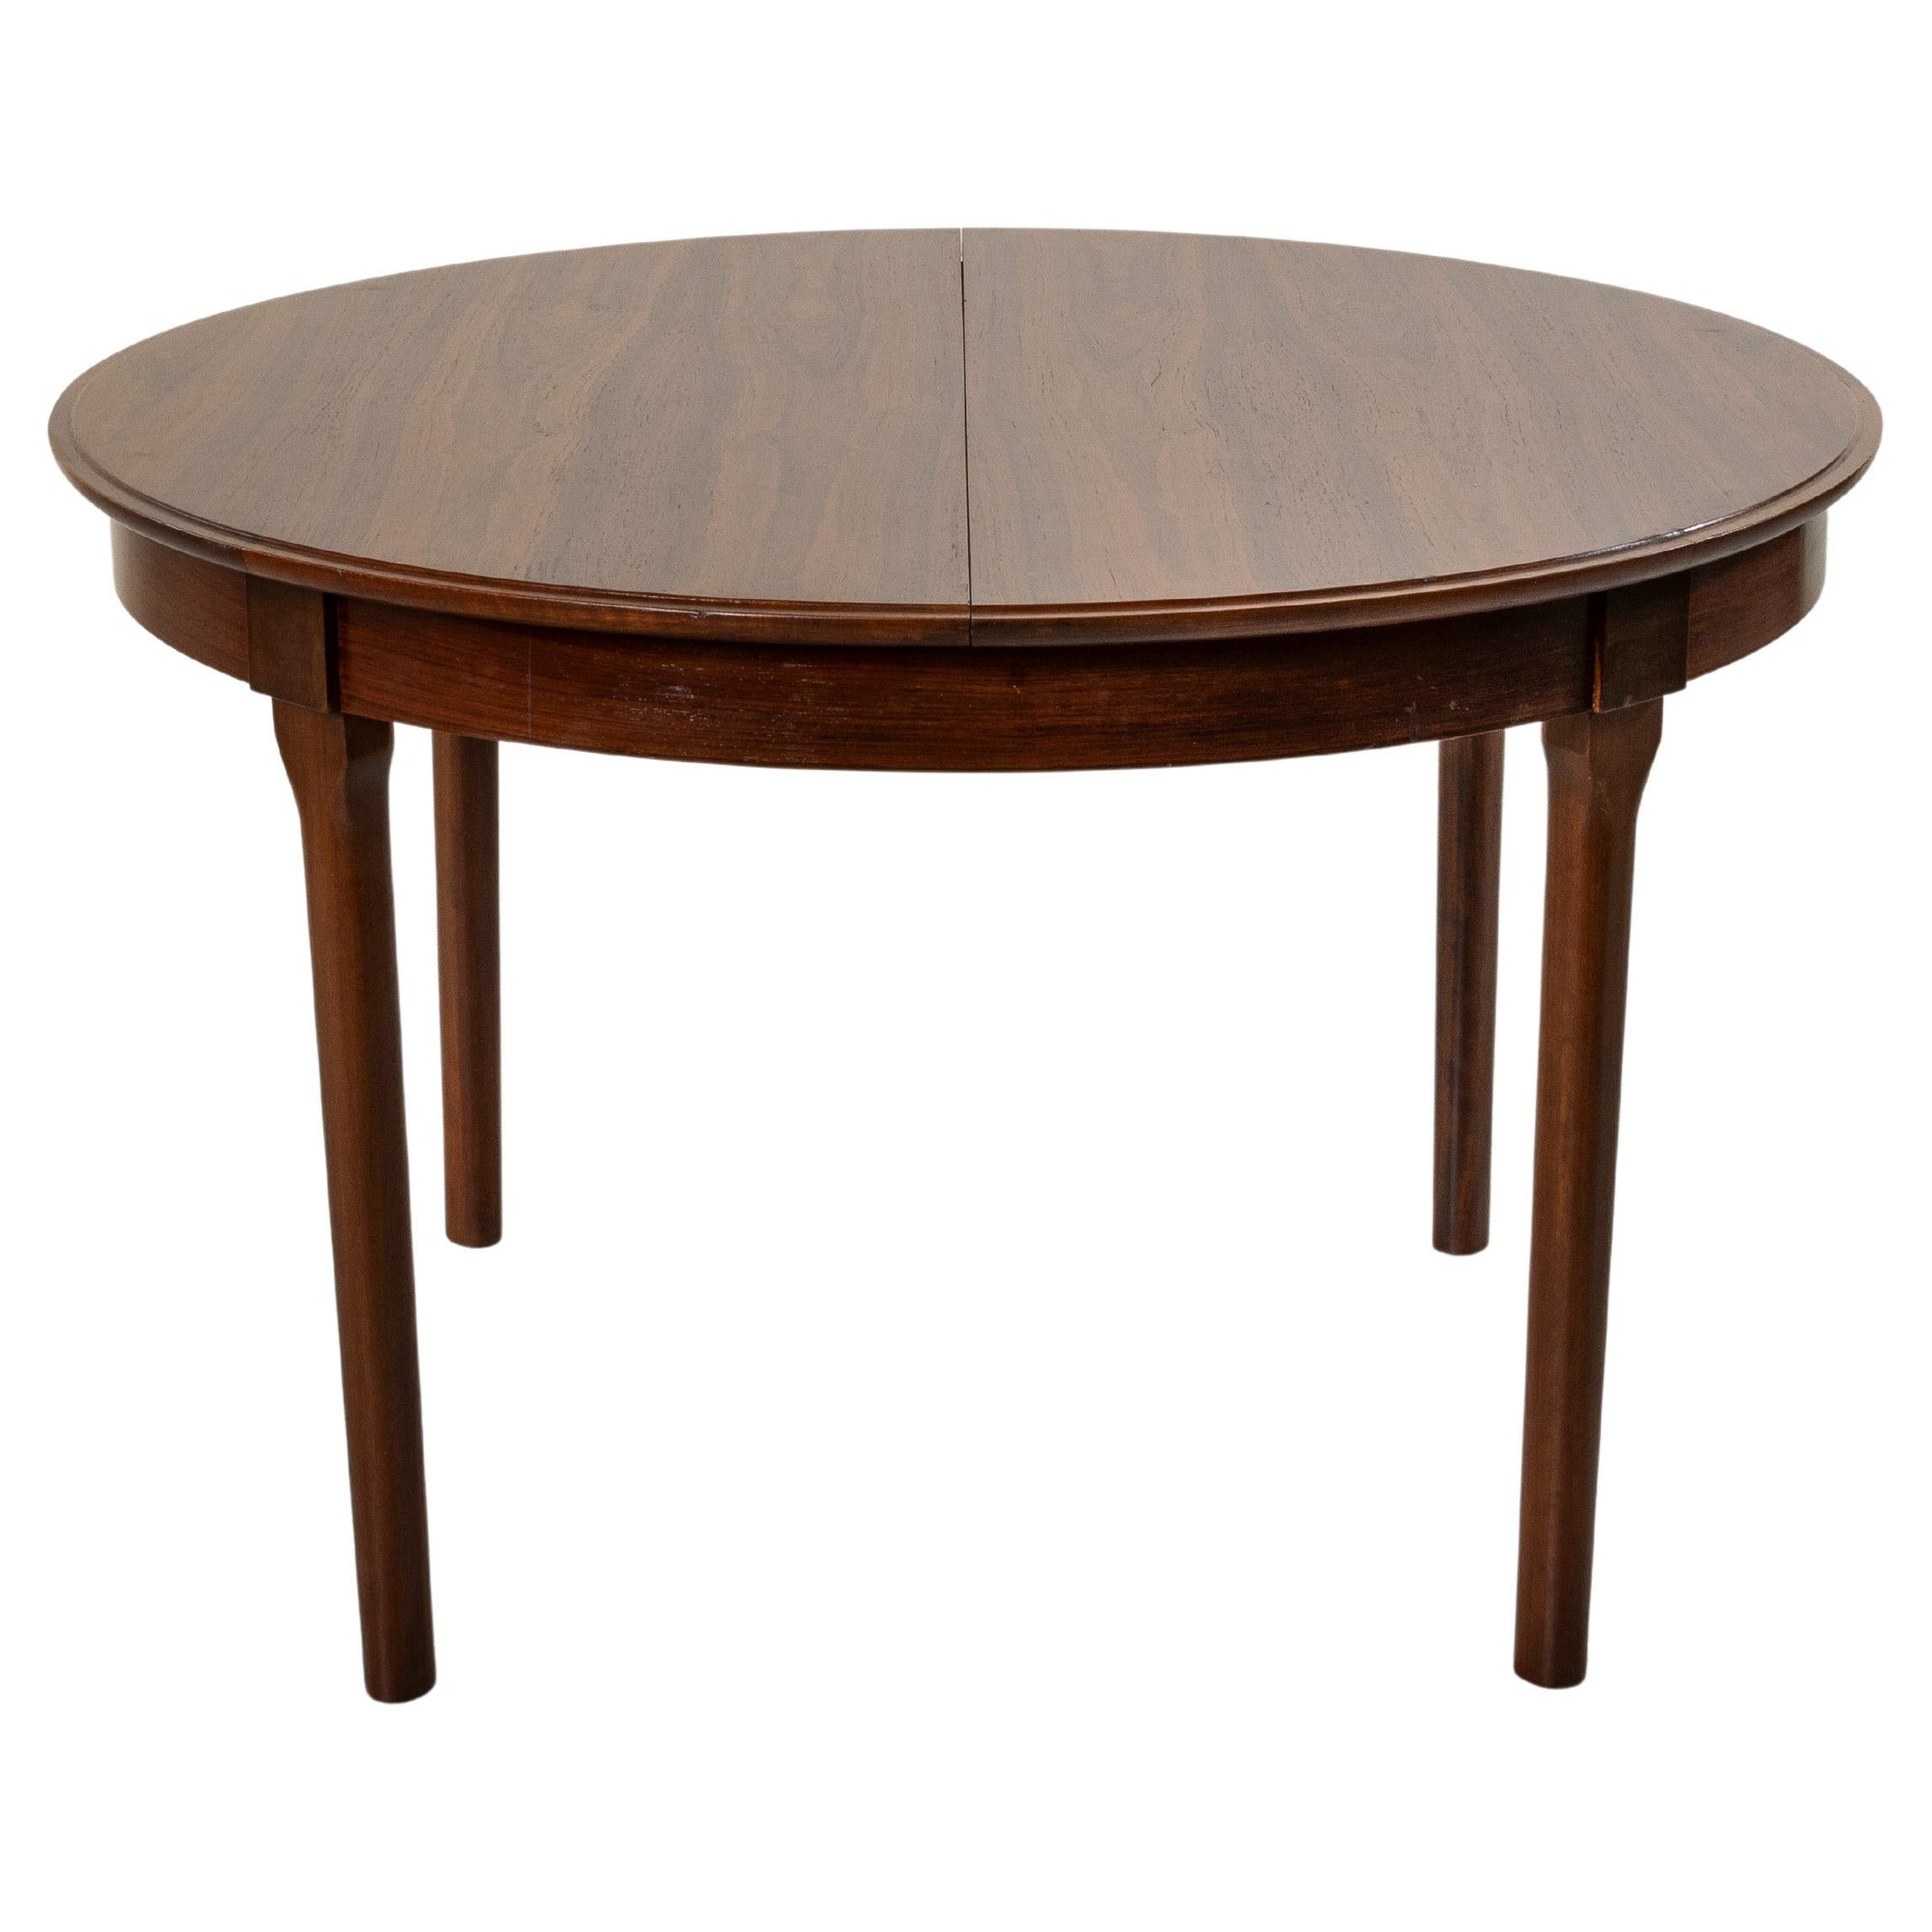 Mid-20th Century Danish Rosewood Round to Oval Dining Table, Collapsible Leaf